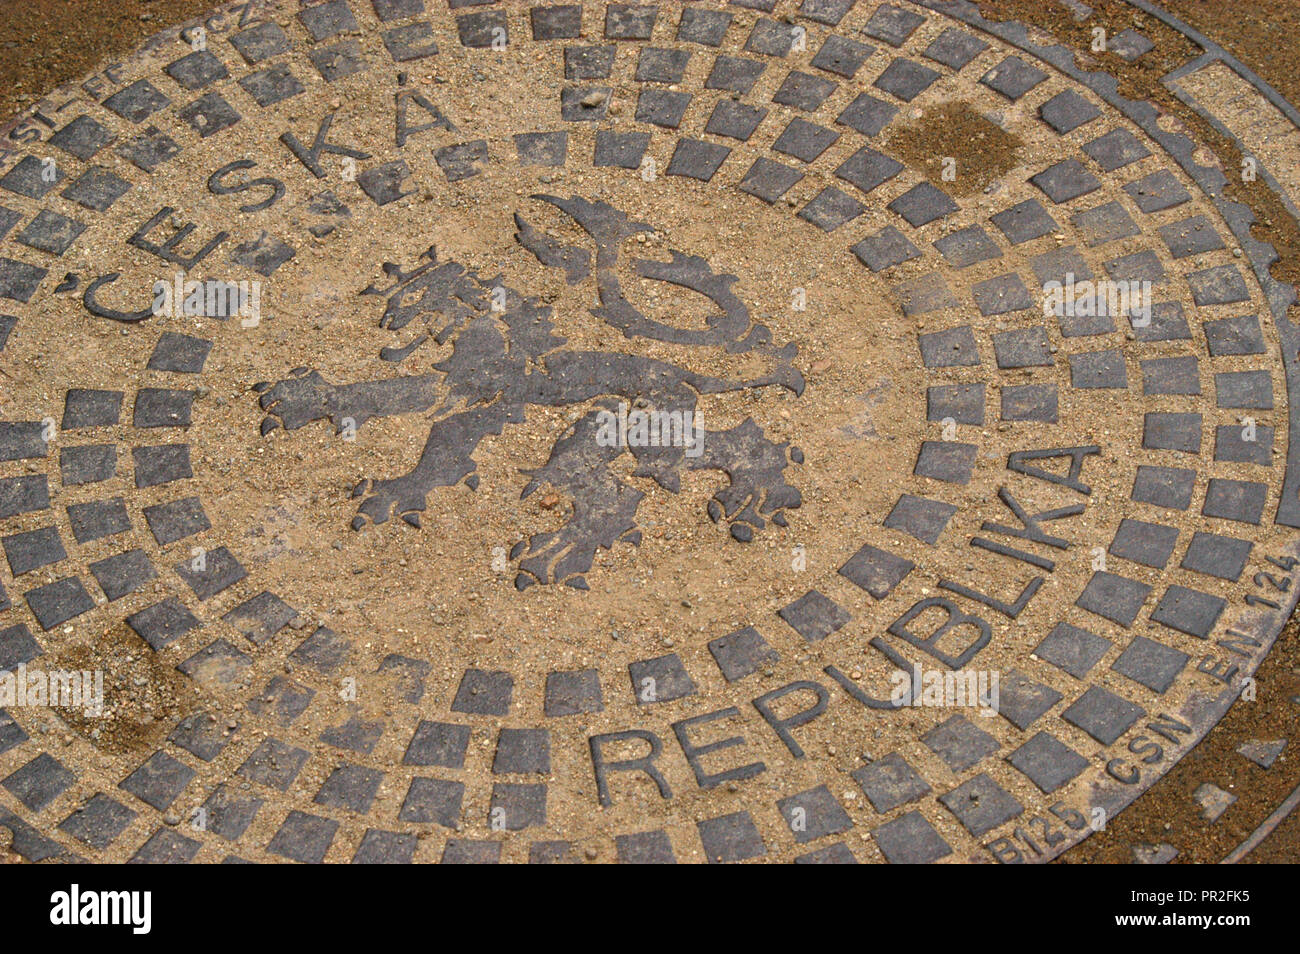 Bohemian heraldic lion depicted on the manhole cover in Prague, Czech Republic. Stock Photo